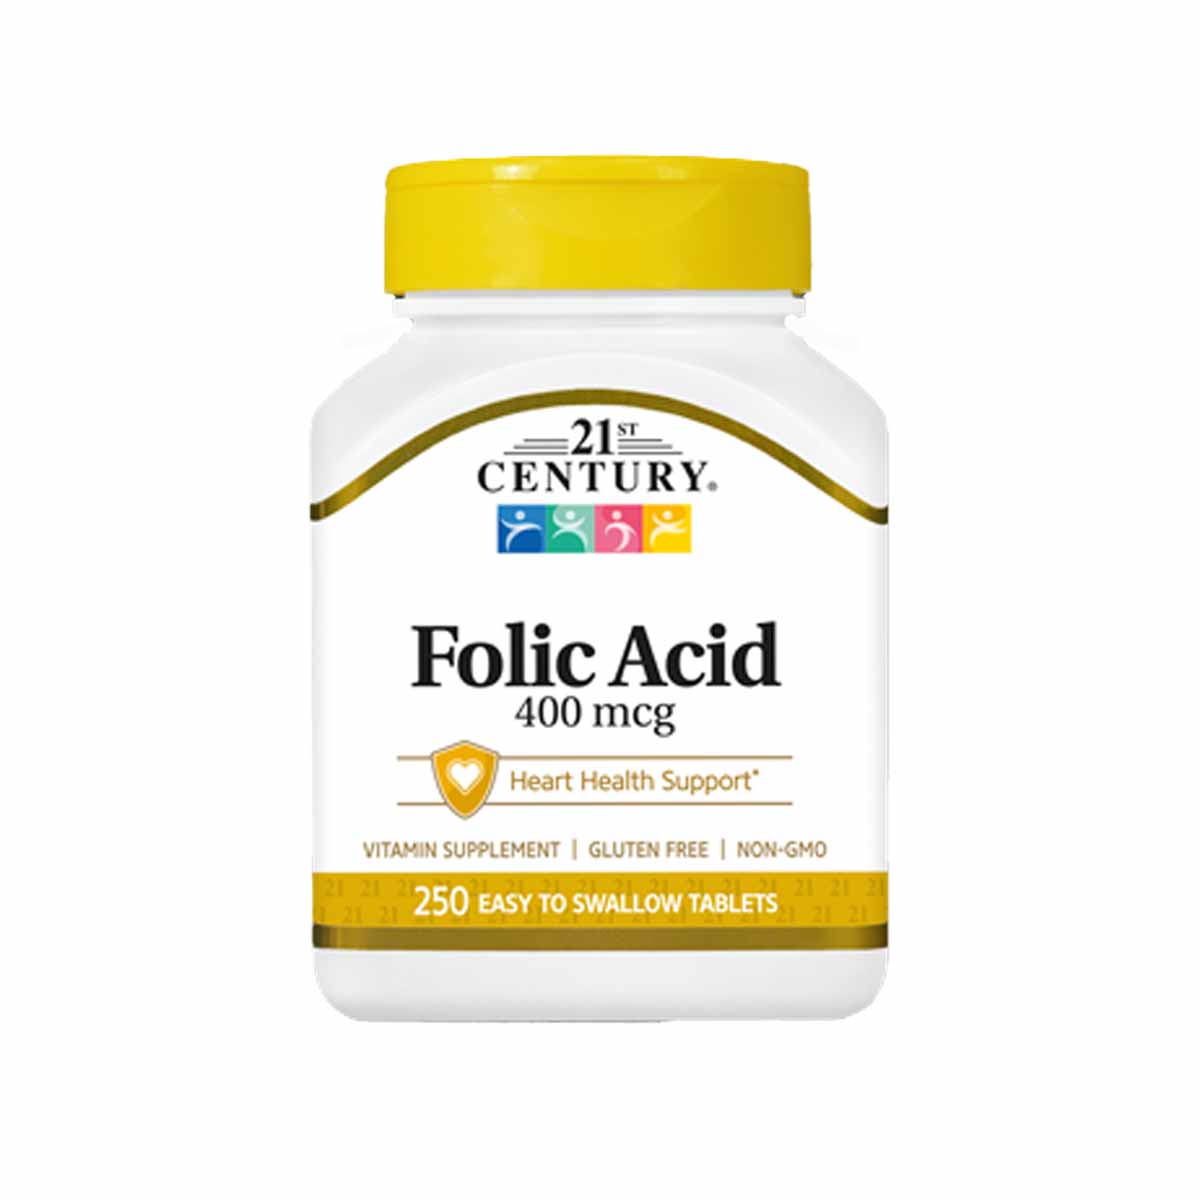 21st Century Folic Acid 400mcg is a dietary supplement for Heart Health Support. It contains 250 tablets that are easy to swallow